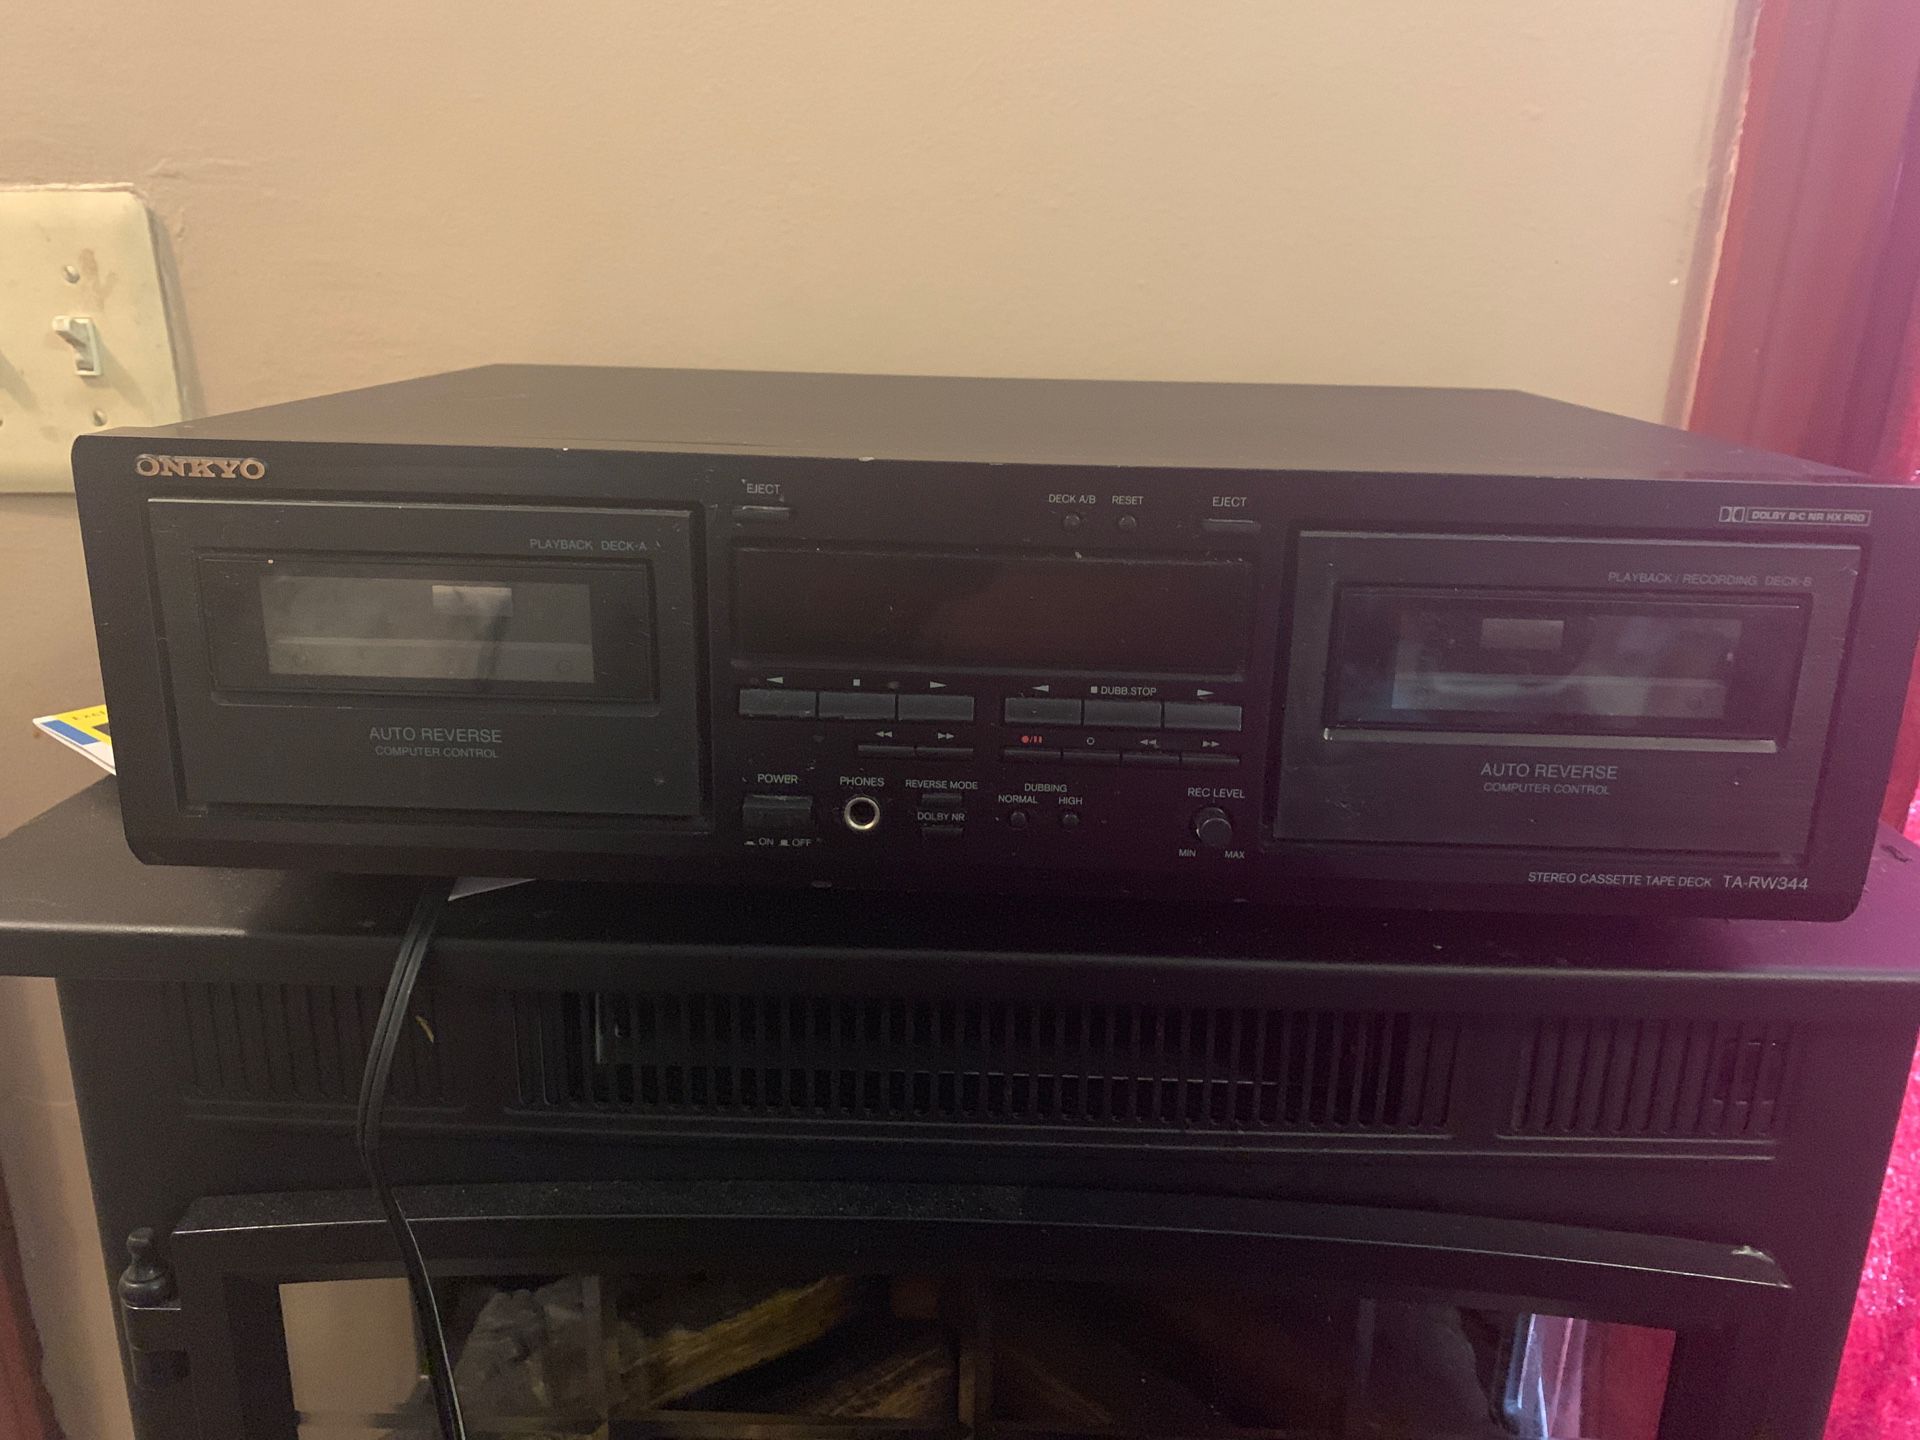 Onkyo TA-RW344 Dual Stereo Cassette Tape Deck Player. Tested/Works Great. In Great Condition. Comes with power supply.